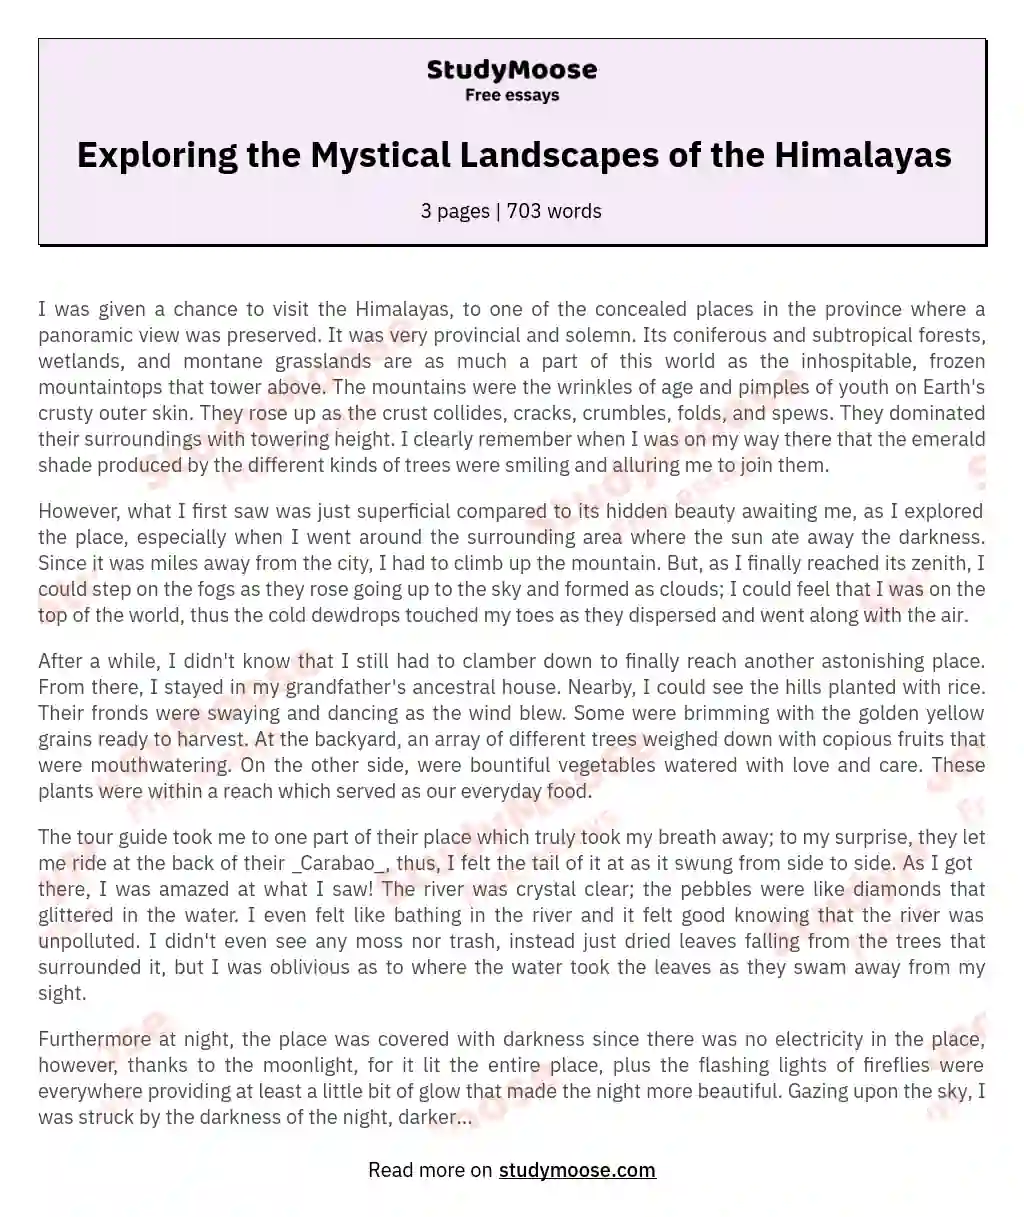 Exploring the Mystical Landscapes of the Himalayas essay